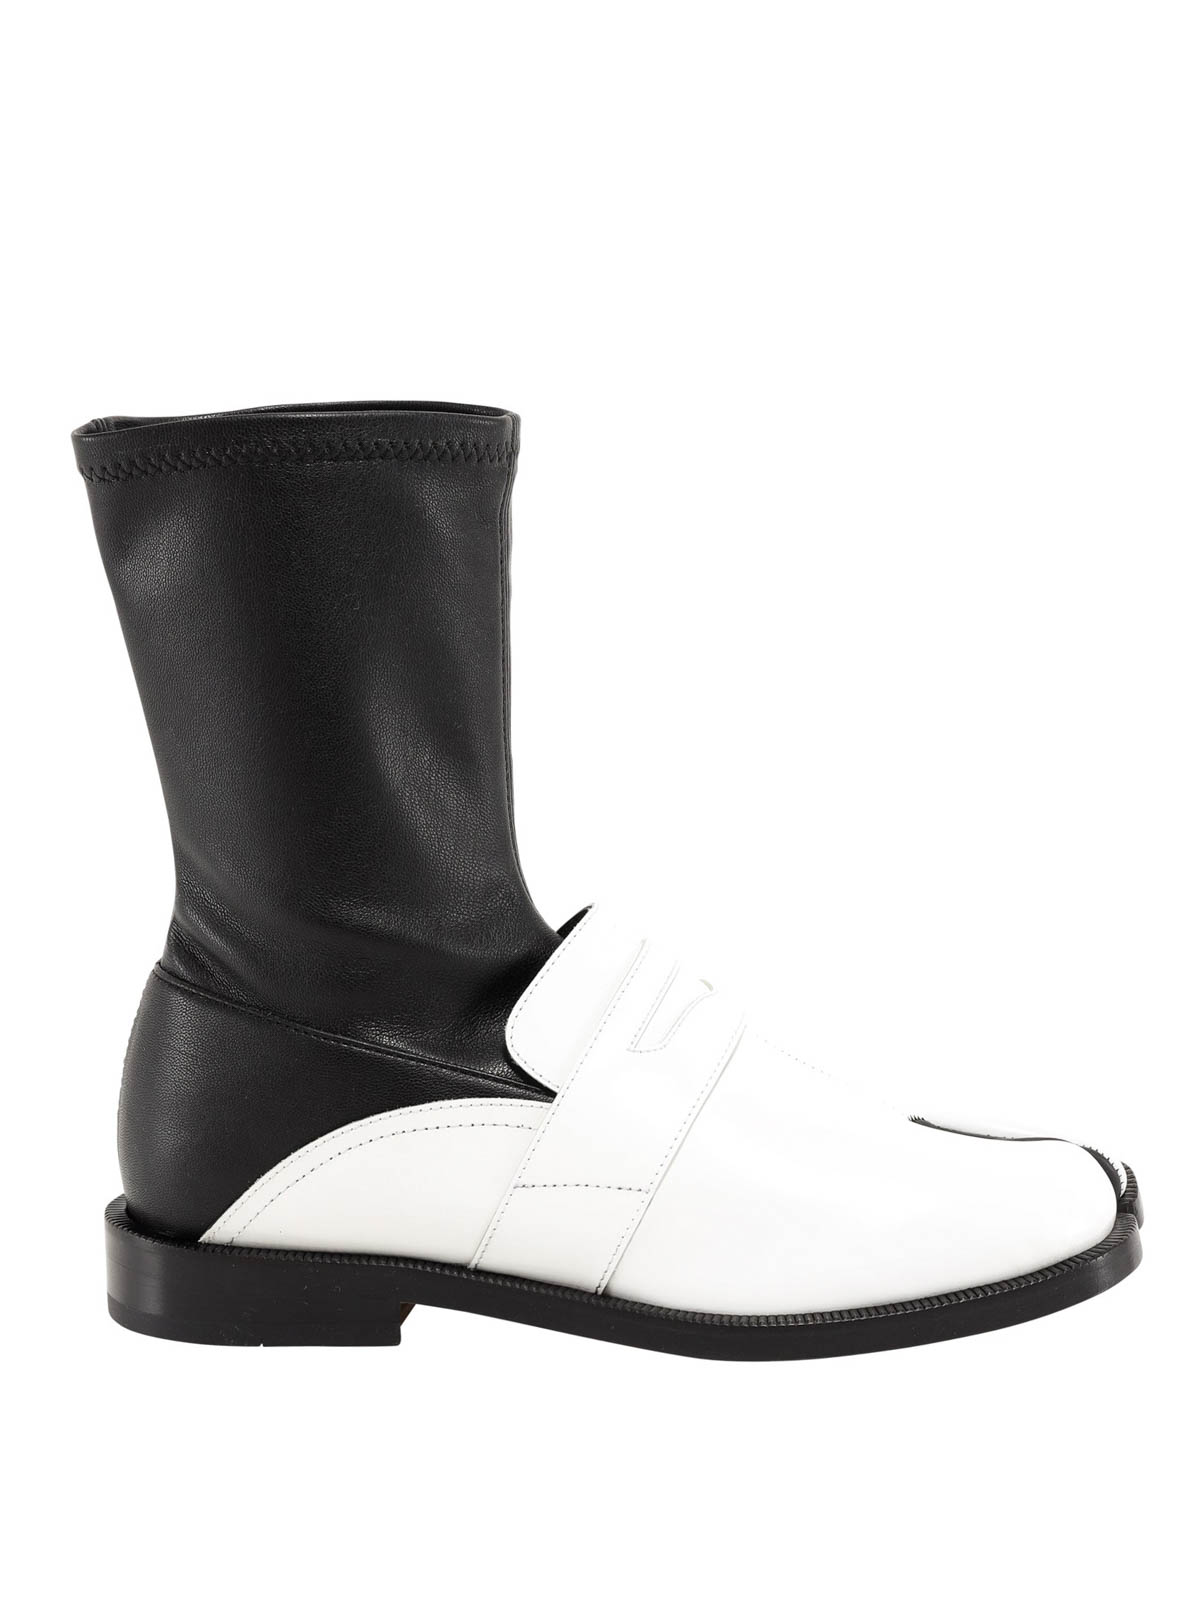 margiela ankle boots